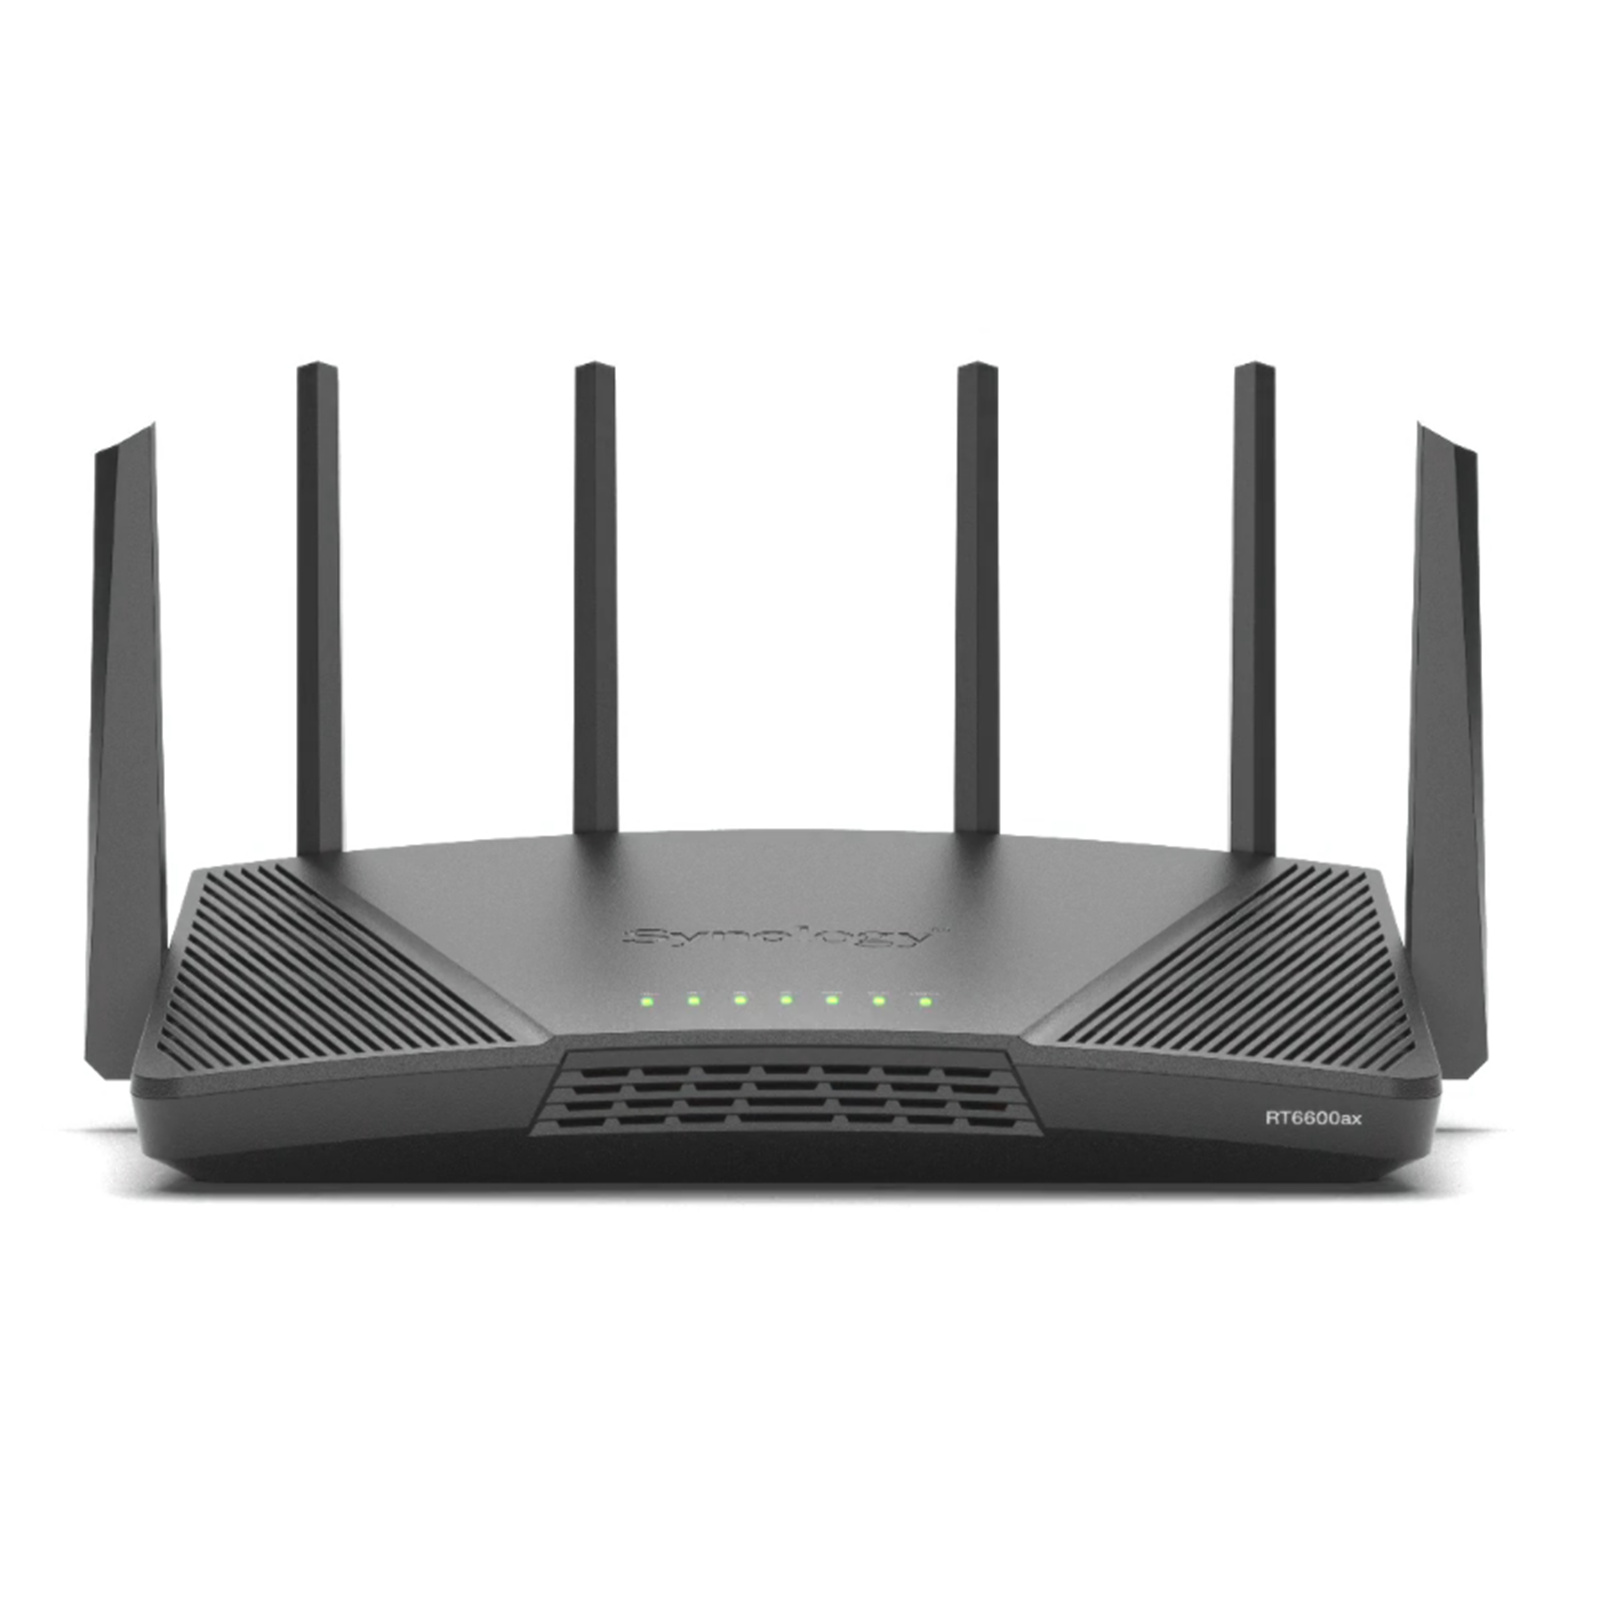 Buy the Synology Router RT6600AX 11ax router with 2.5Gbps backhaul, Mesh,  and... ( RT6600ax ) online - PBTech.com/pacific